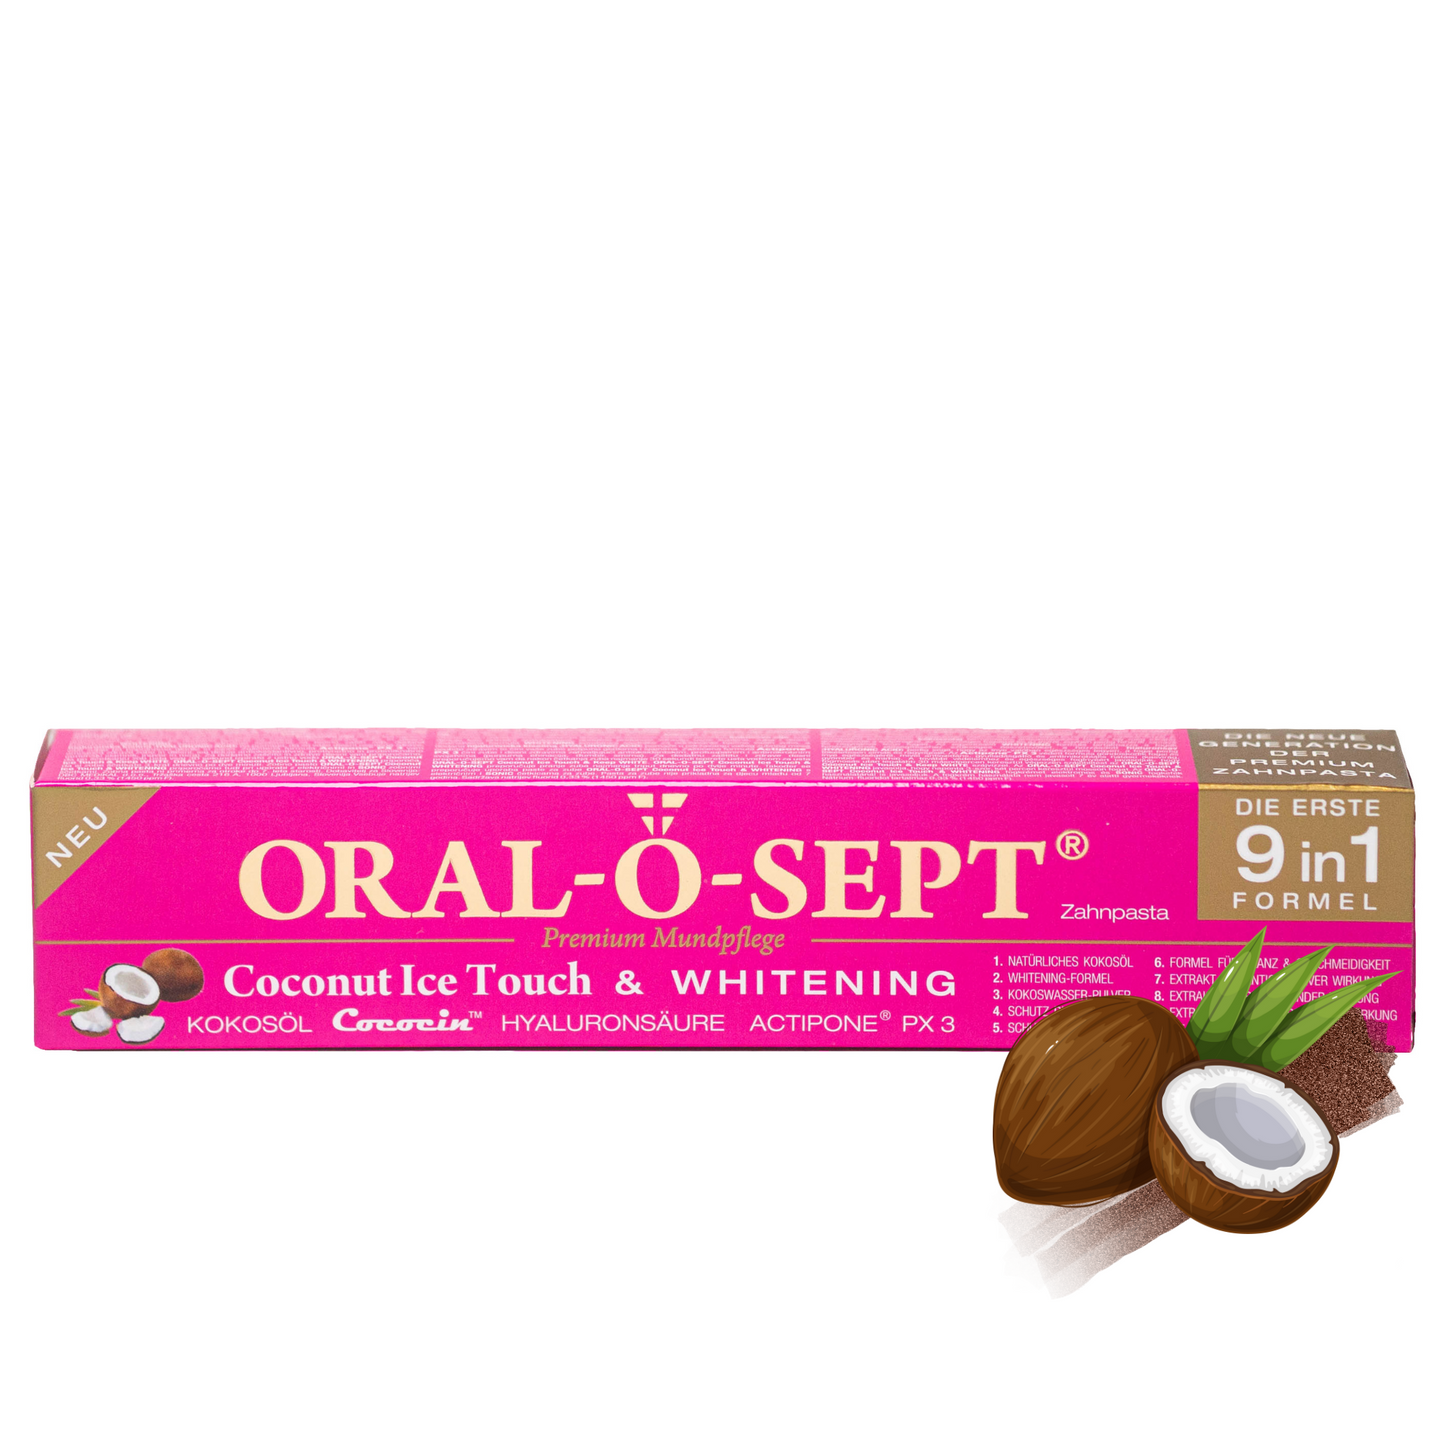 ORAL-O-SEPT Premium Toothpaste Coconut Ice Touch & WHITENING (Pack of 3+1 GRATIS)